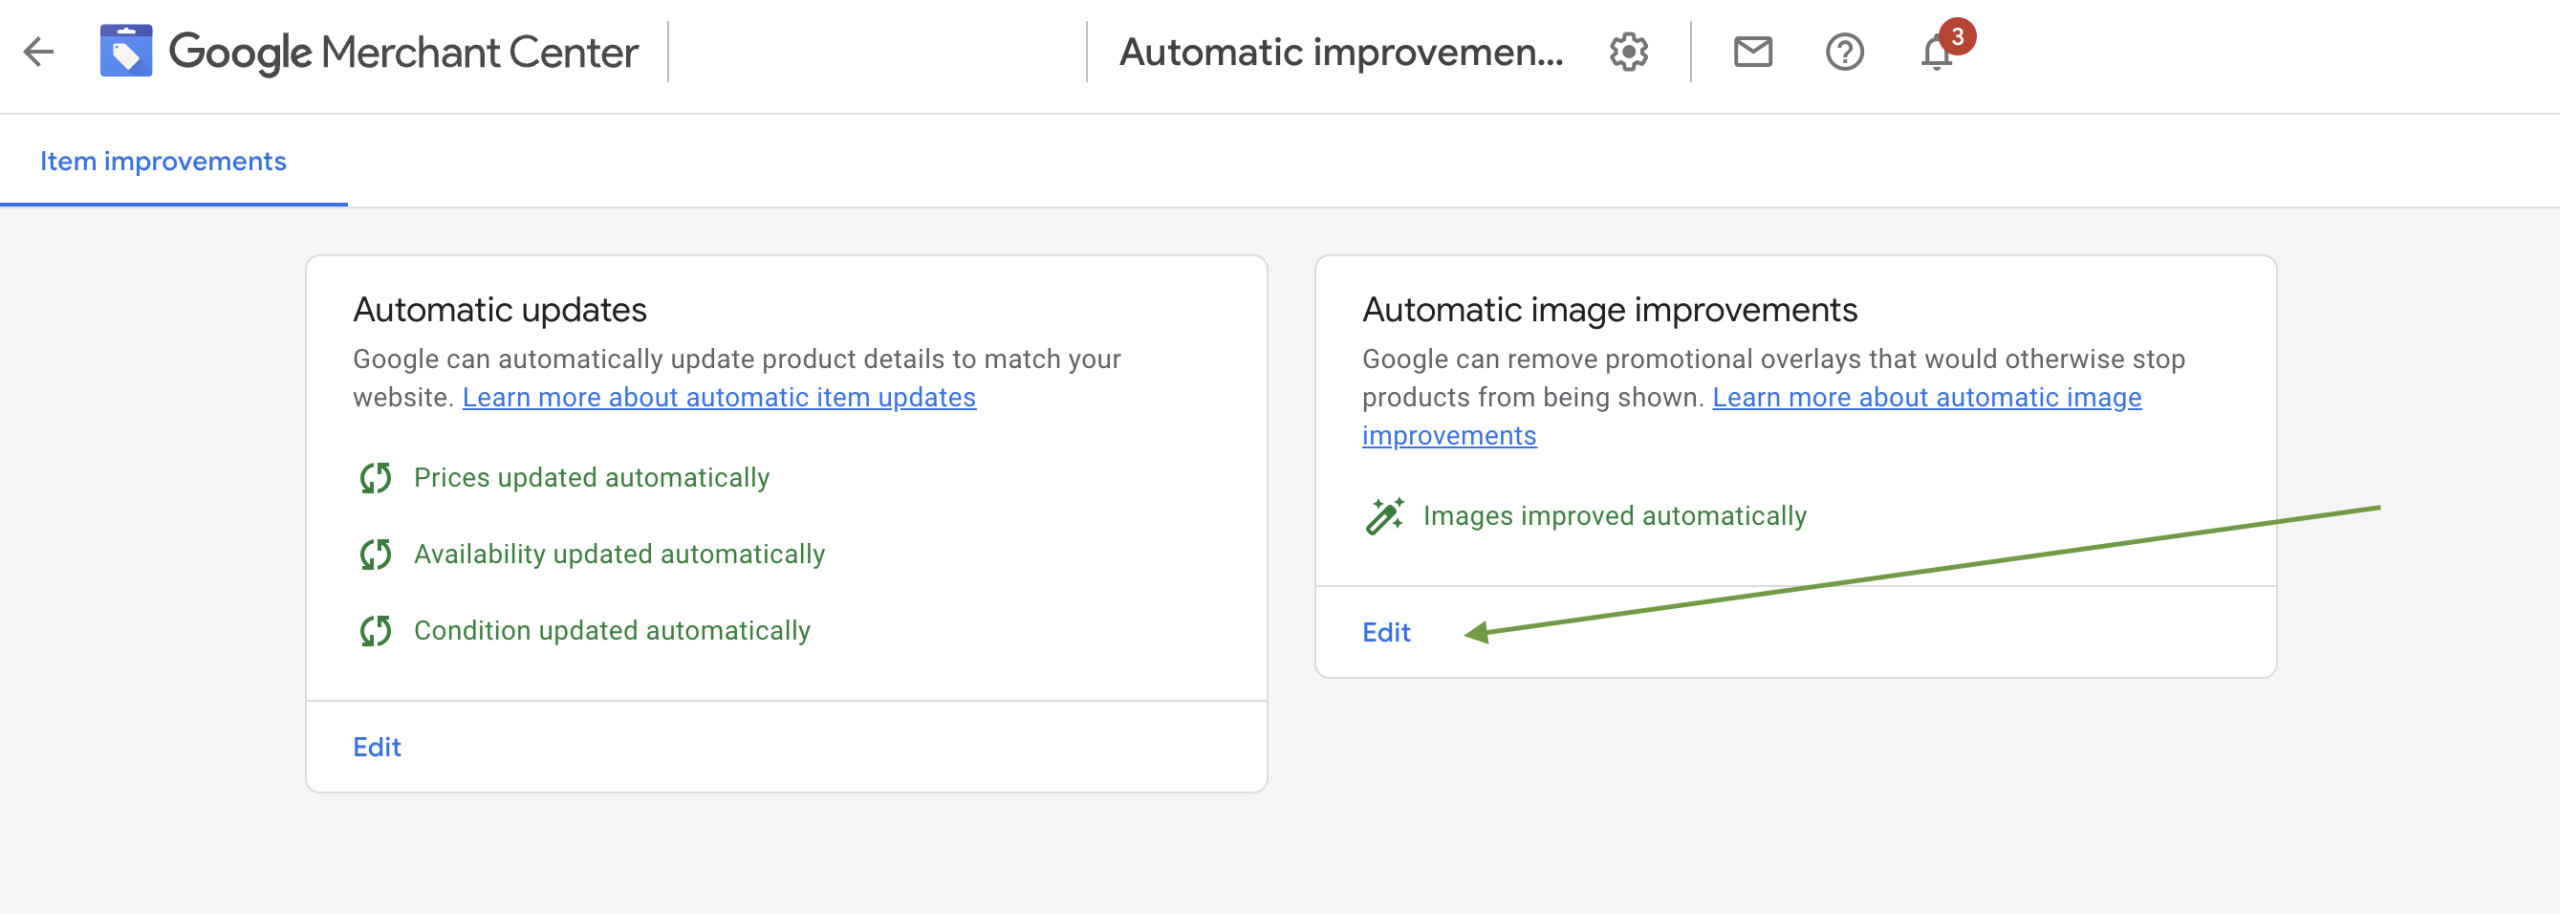 Screen grab annotated to indicate where to edit Automatic image improvement settings in the Google Merchant Center interface